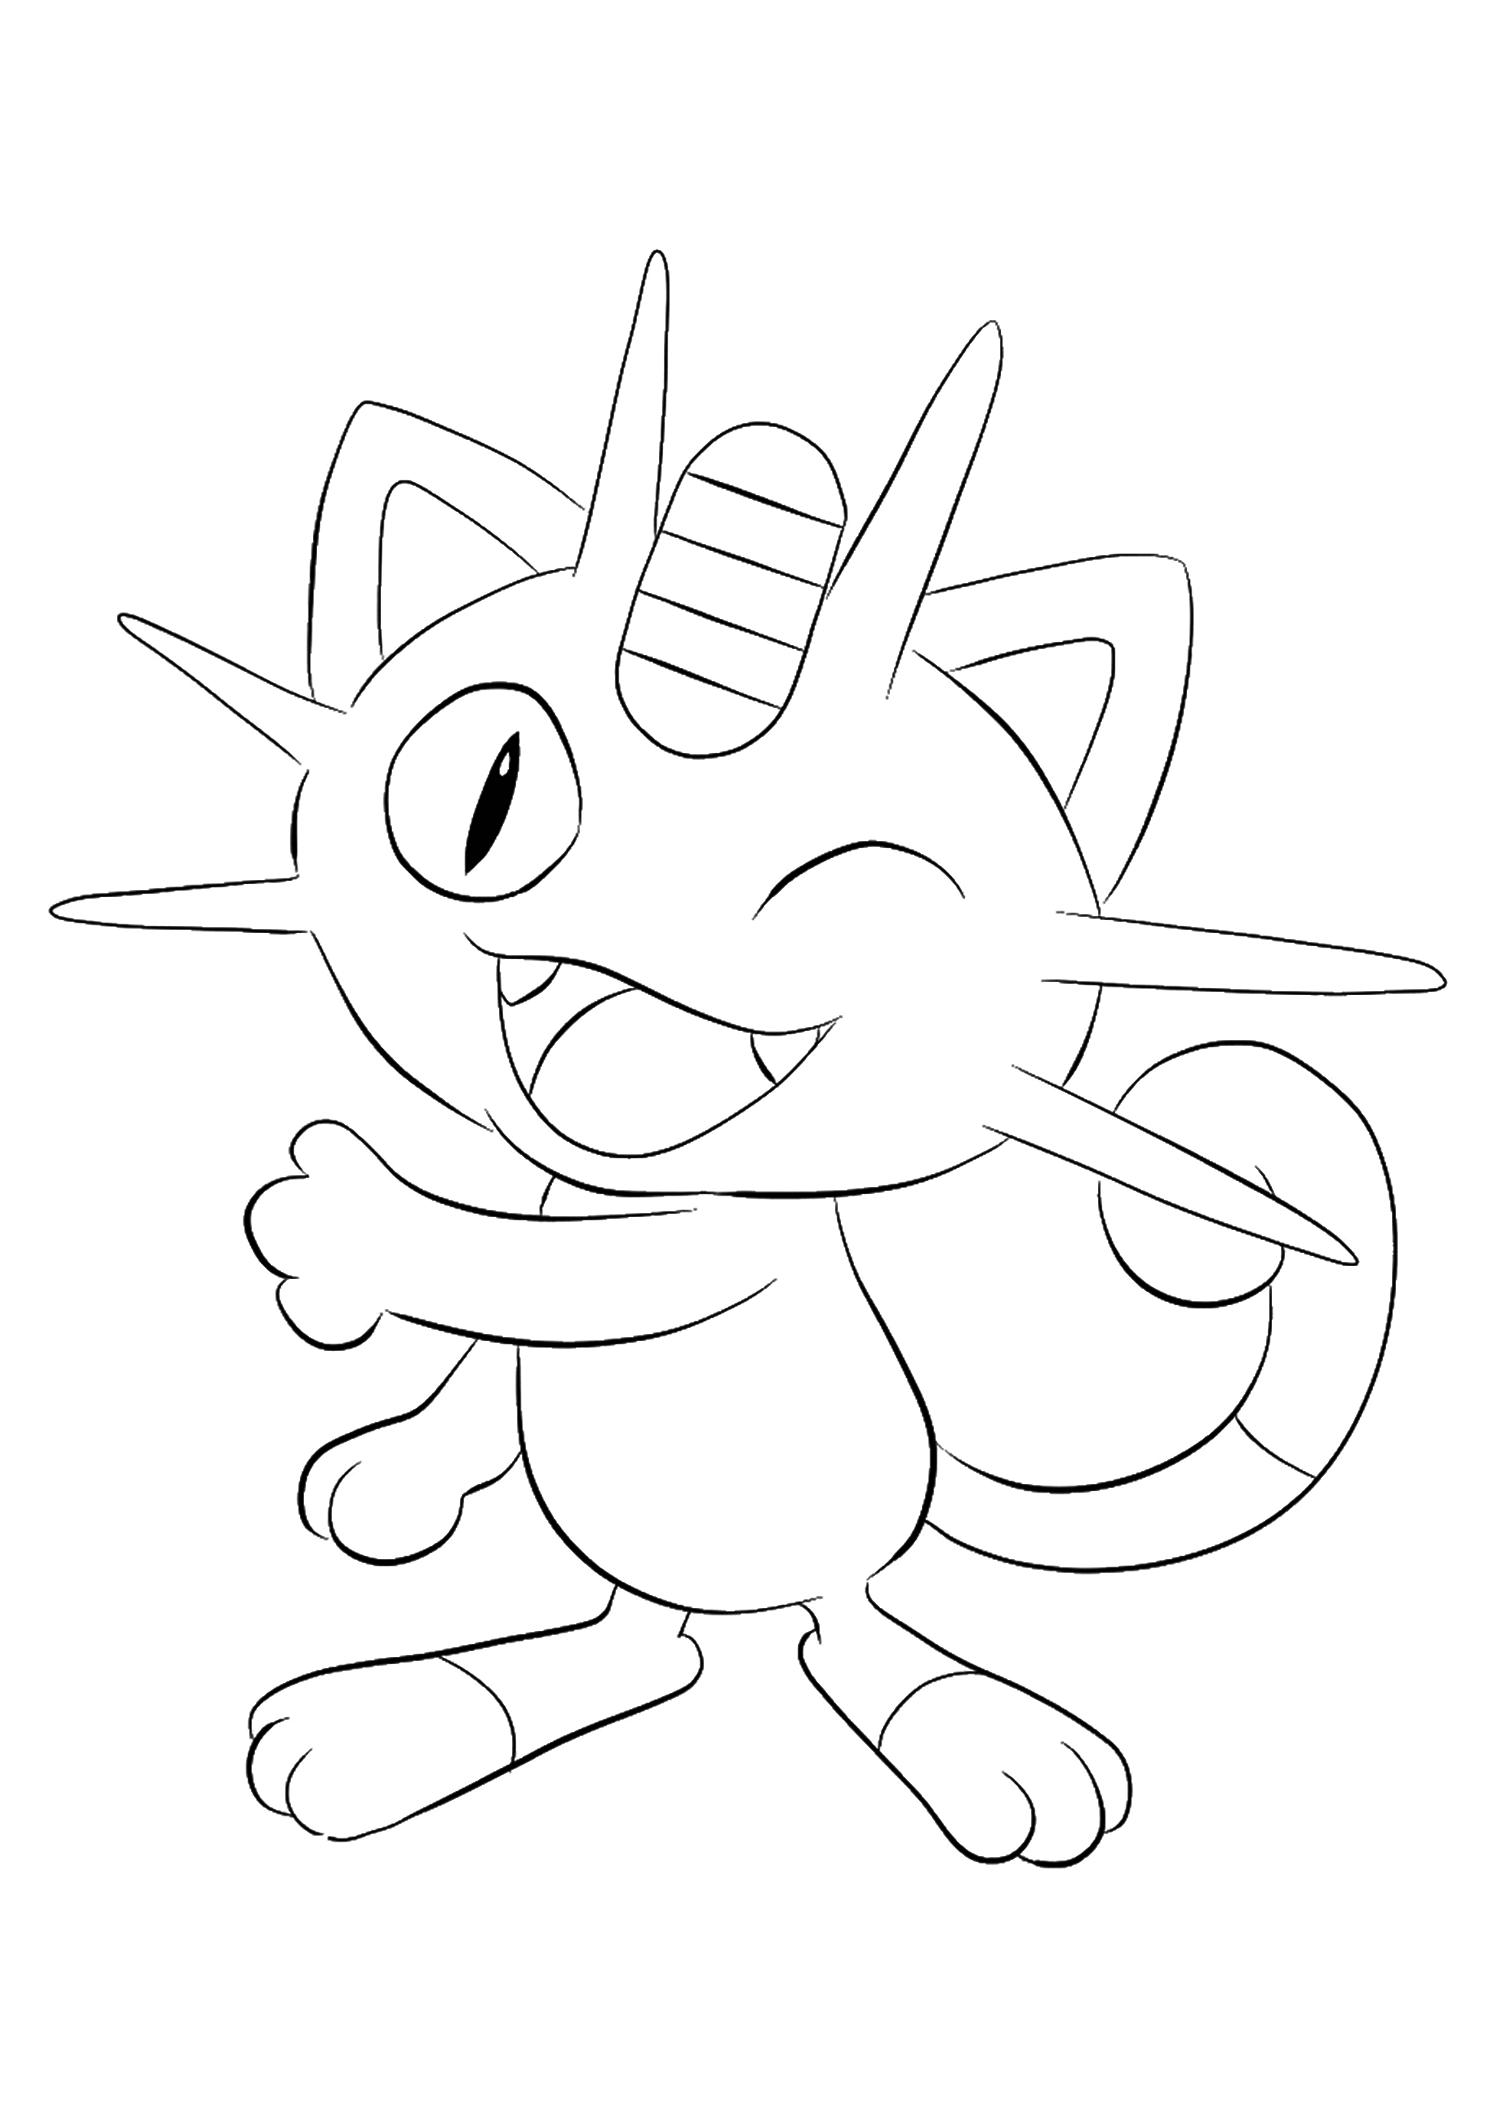 Meowth (No.52) : Pokemon (Generation I) - All Pokemon coloring pages ...